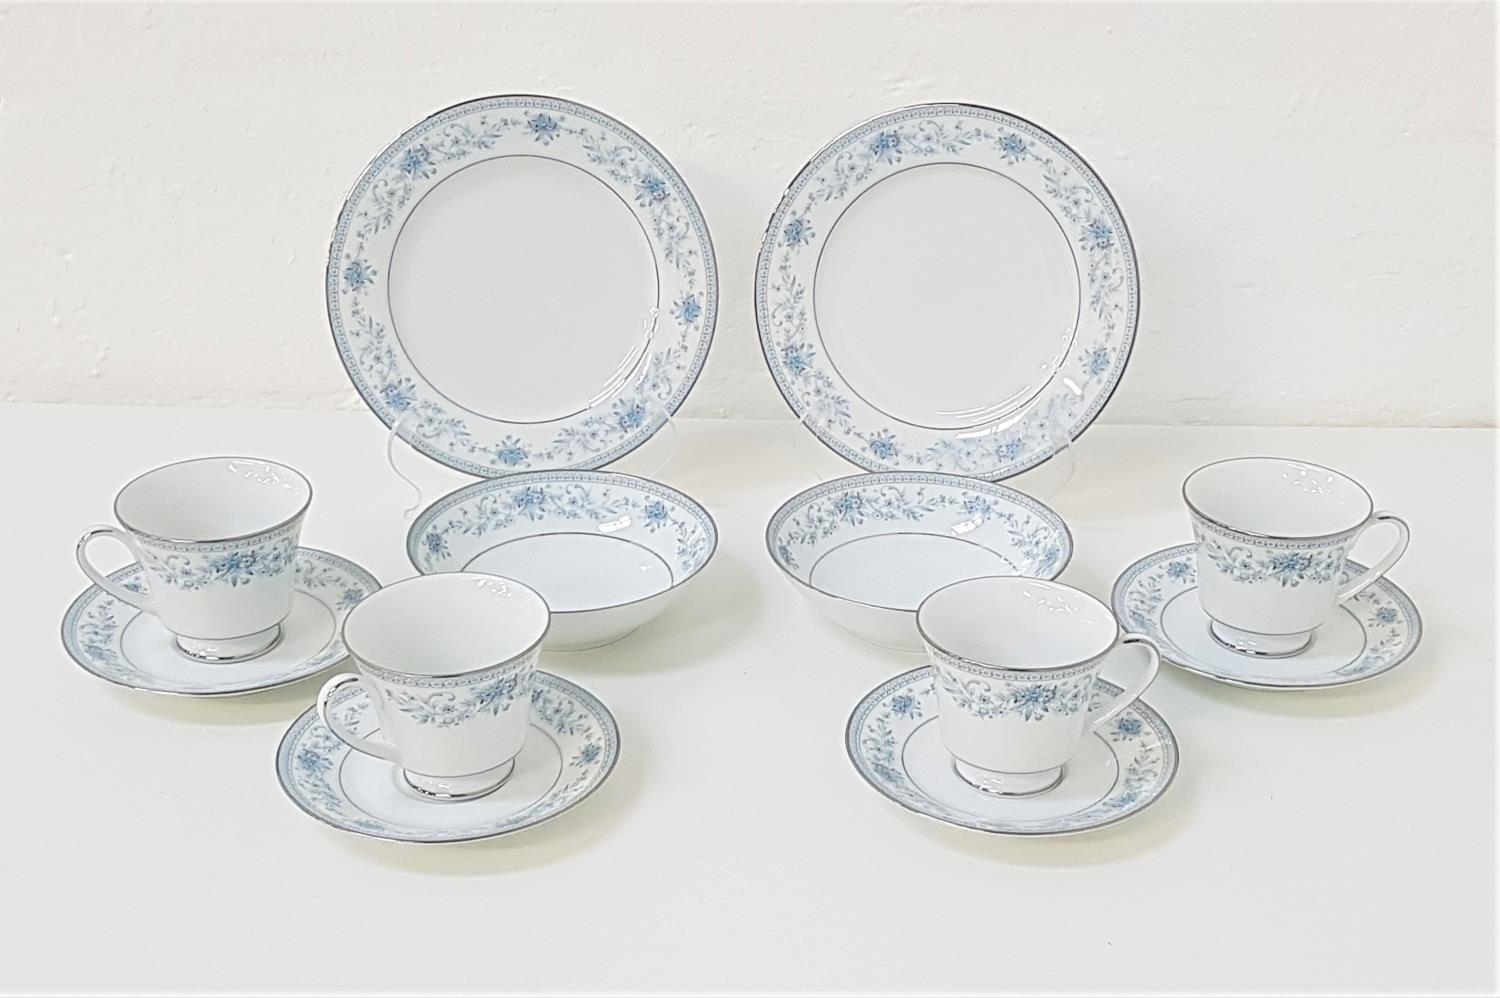 NORITAKE DINNER SERVICE decorated in the Blue Hill pattern, comprising dinner plates, entree plates,